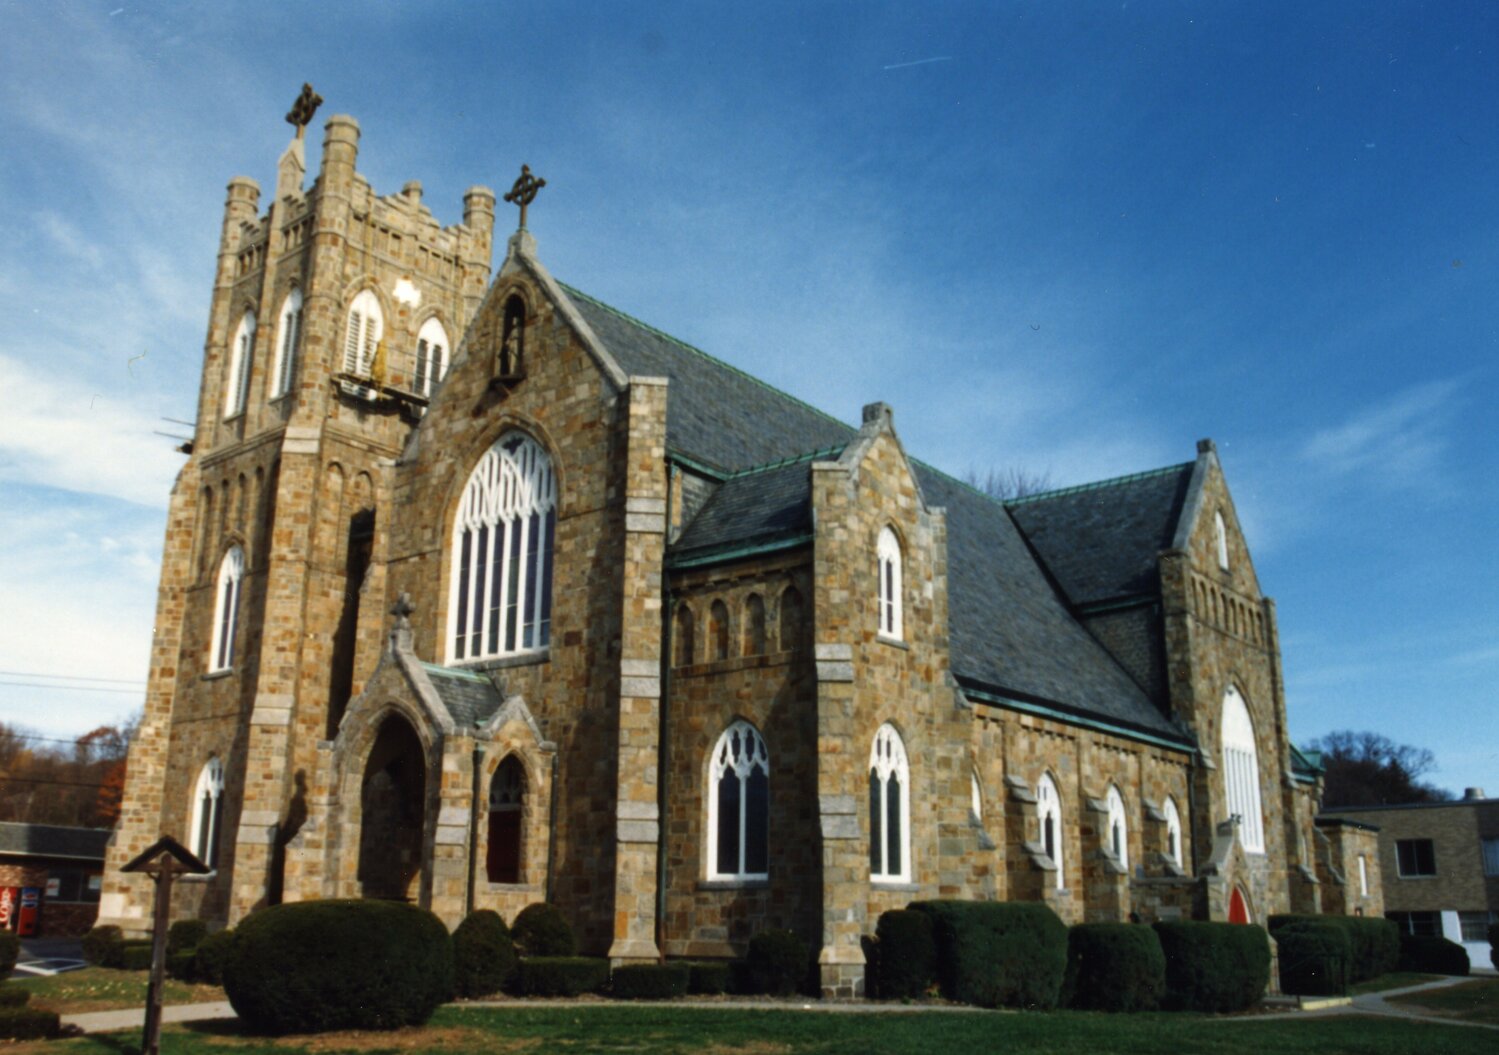 St. Thomas Church in Thomaston, Conn., is pictured in this photo from November 1991. The Archdiocese of Hartford has asked the Vatican to investigate a possible Eucharistic miracle that occurred March 5, 2023. St. Thomas parish was once pastored by Father Michael J. McGivney, who founded the Knights of Columbus while there.